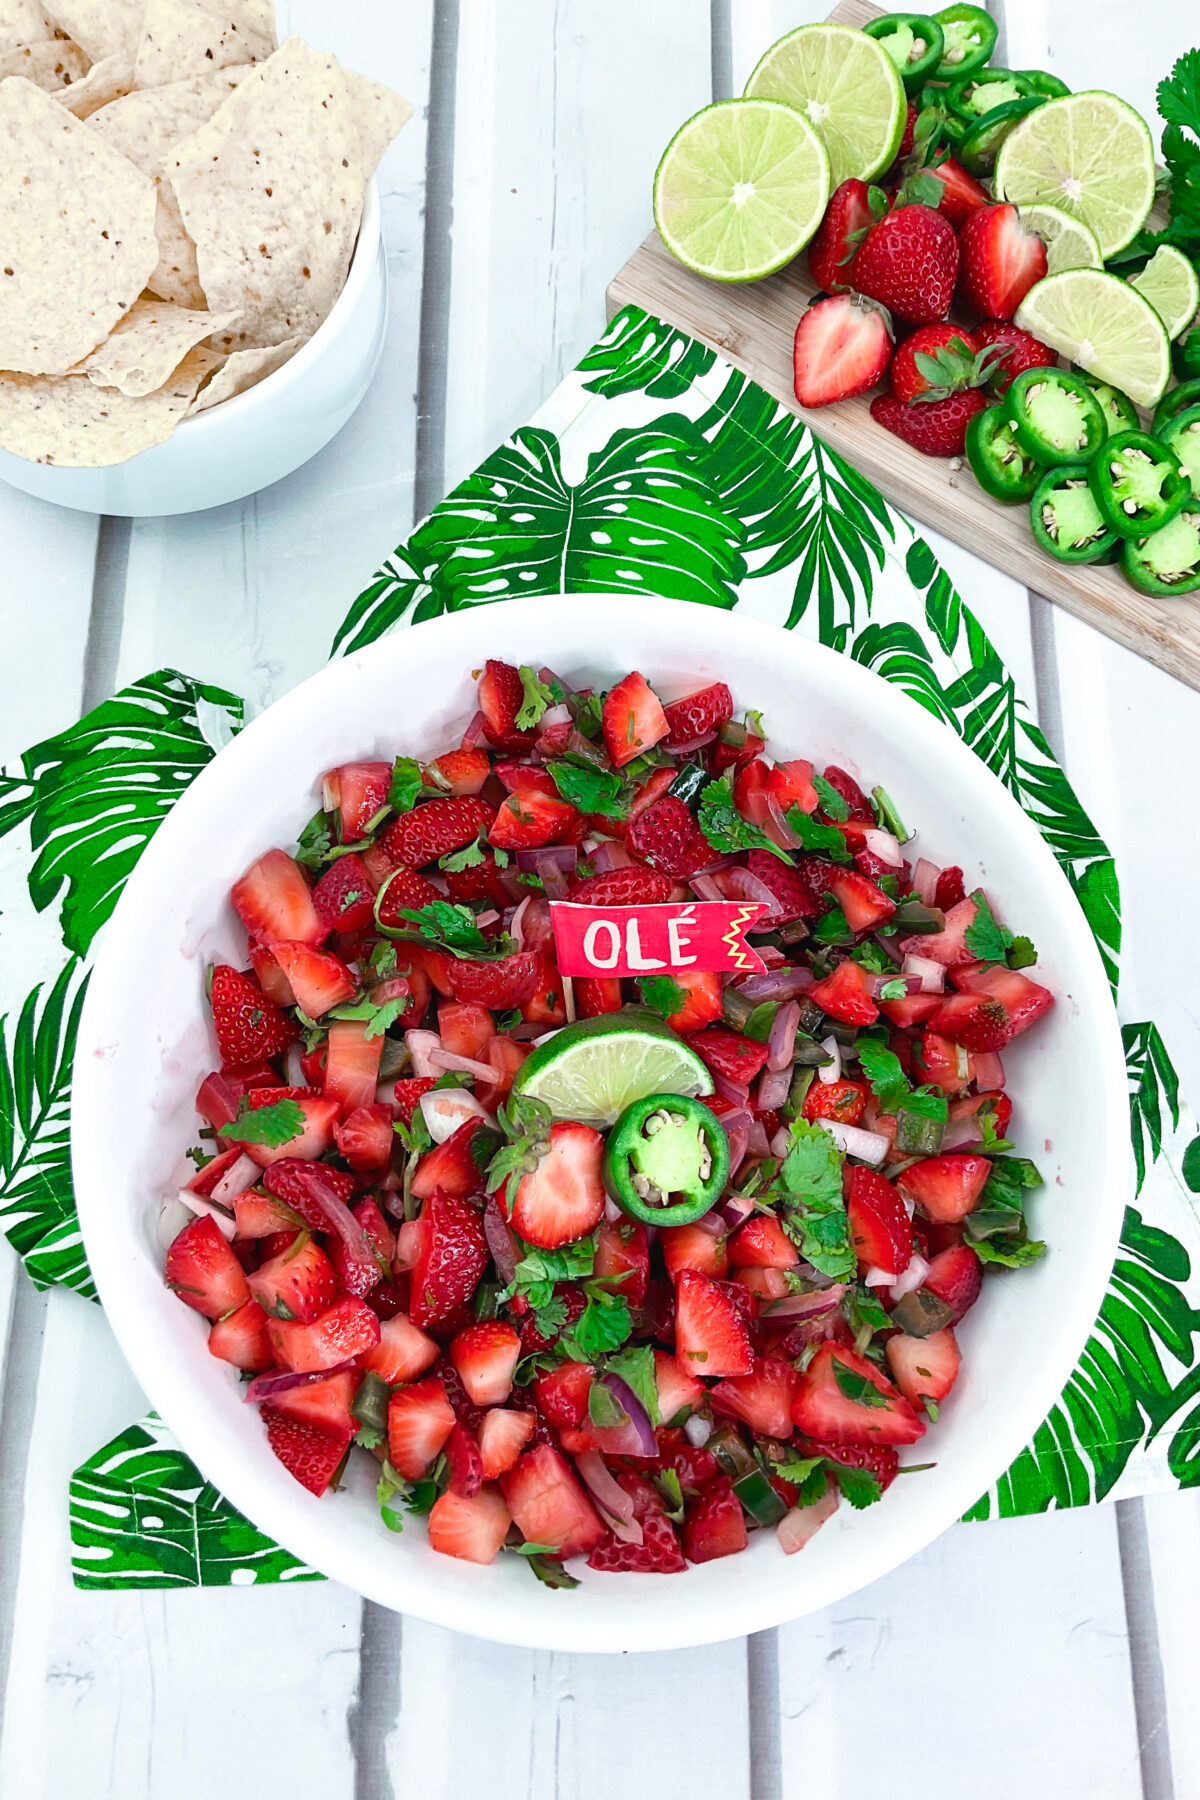 Spice up your next meal with this easy and delicious twist on traditional pico de gallo – strawberry pico de gallo!